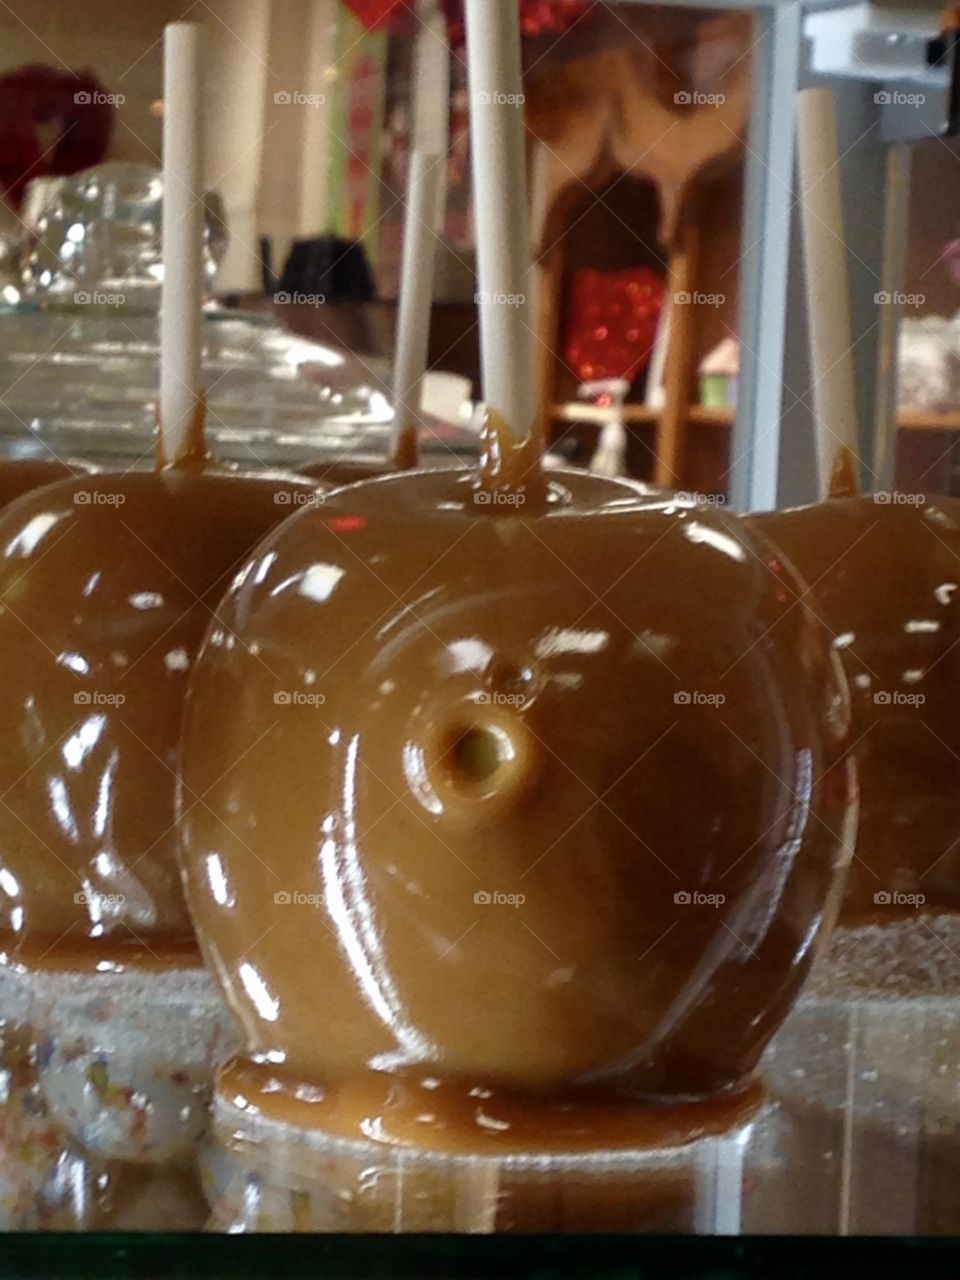 Perfectly imperfect caramel apple with bubble 